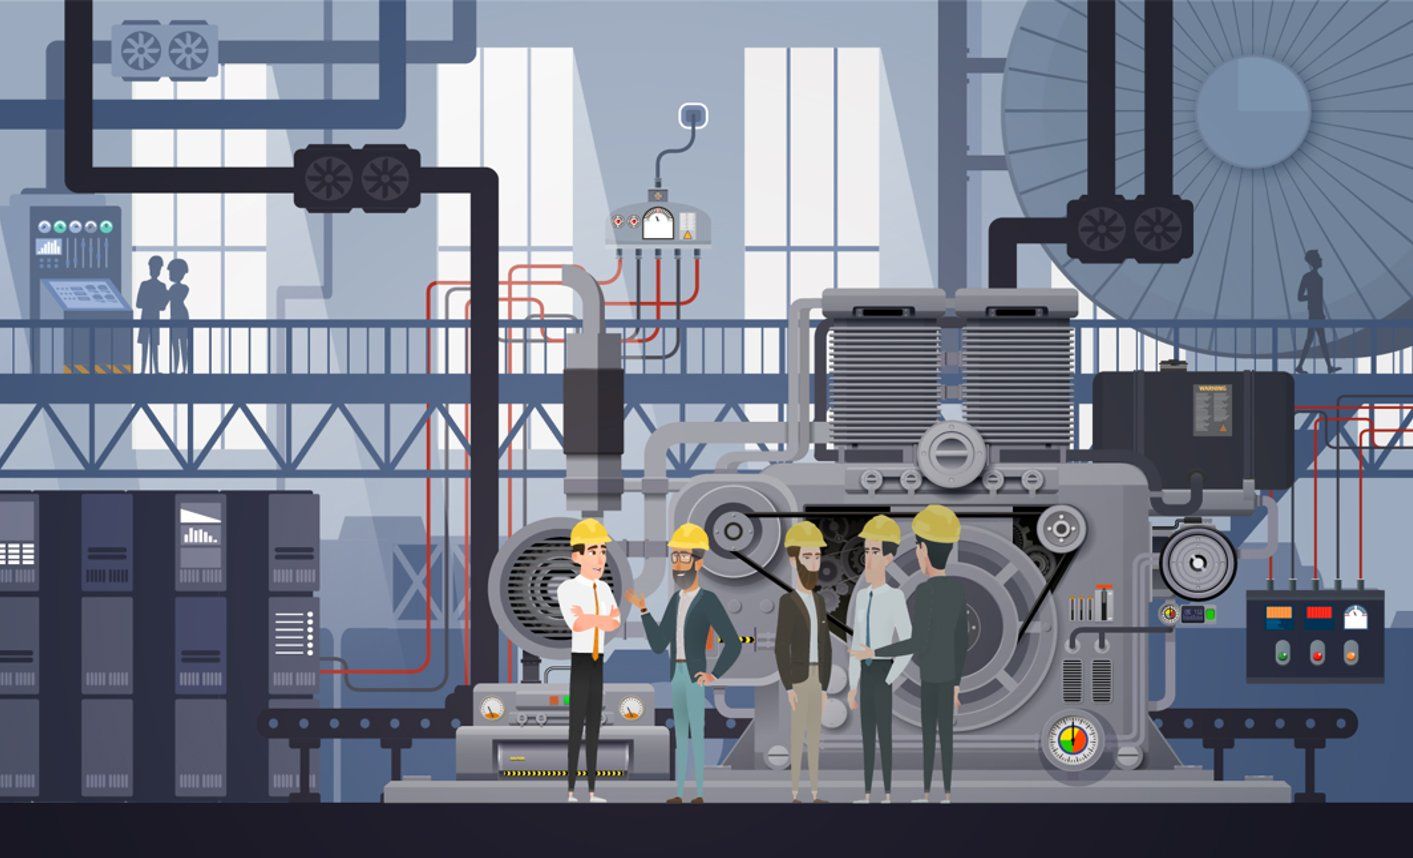 Cartoon of a group of men in personal protective equipment standing amongst machinery in a warehouse.